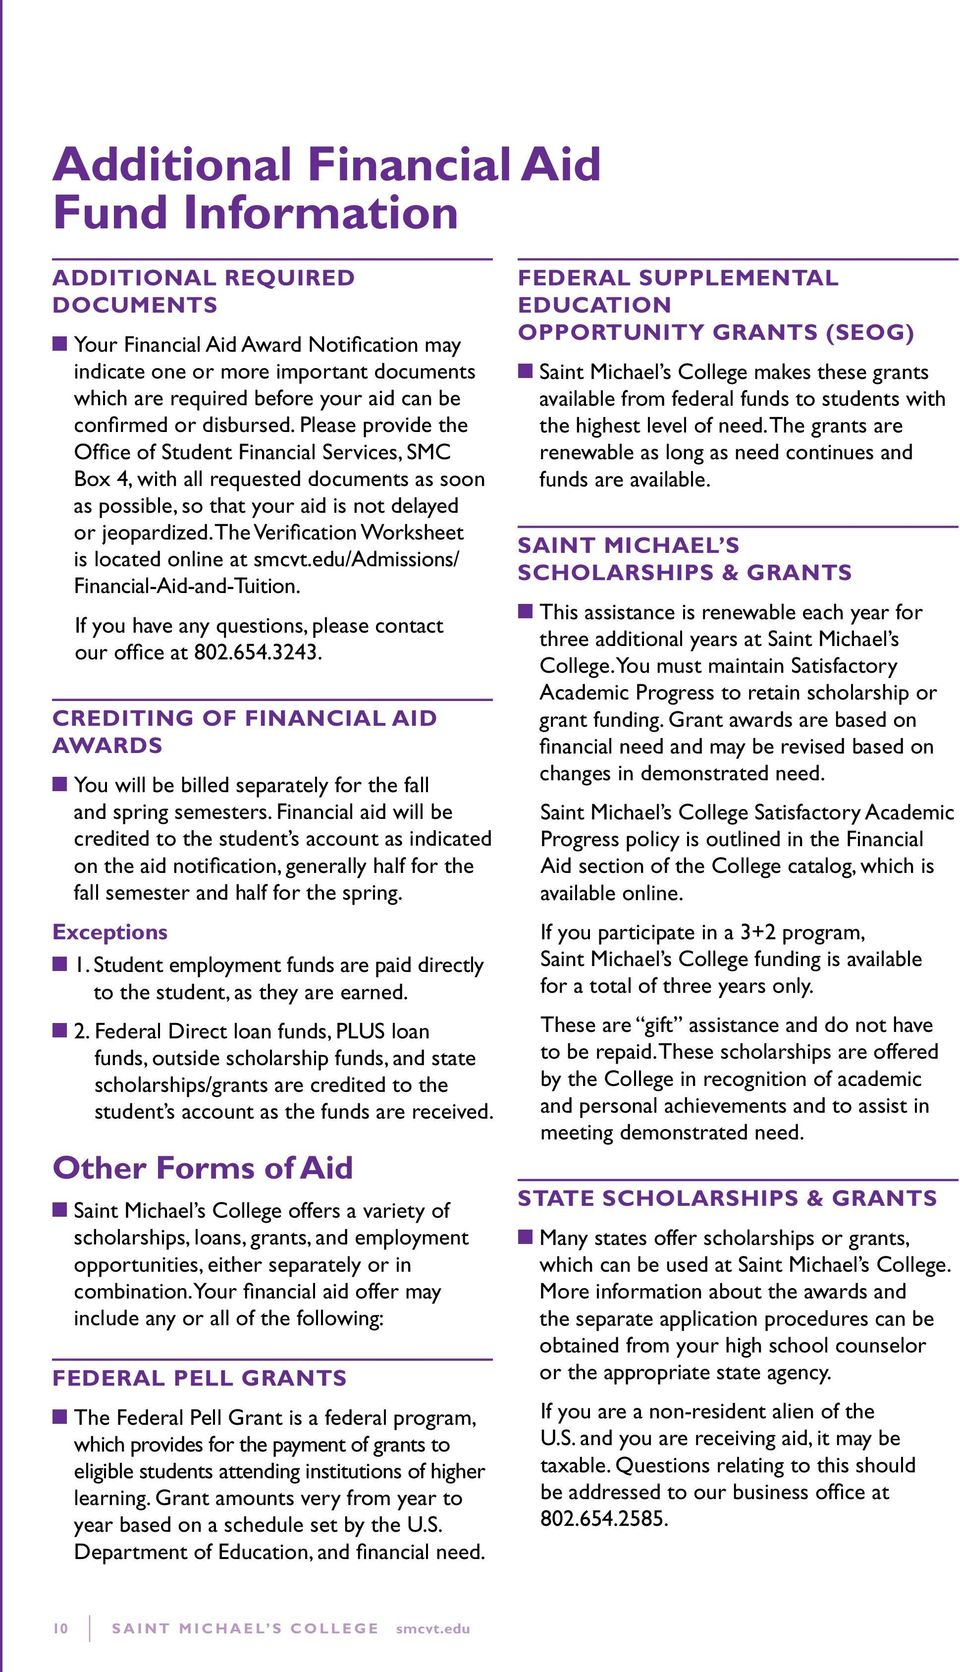 The Verification Worksheet is located online at smcvt.edu/admissions/ Financial-Aid-and-Tuition. If you have any questions, please contact our office at 802.654.3243.